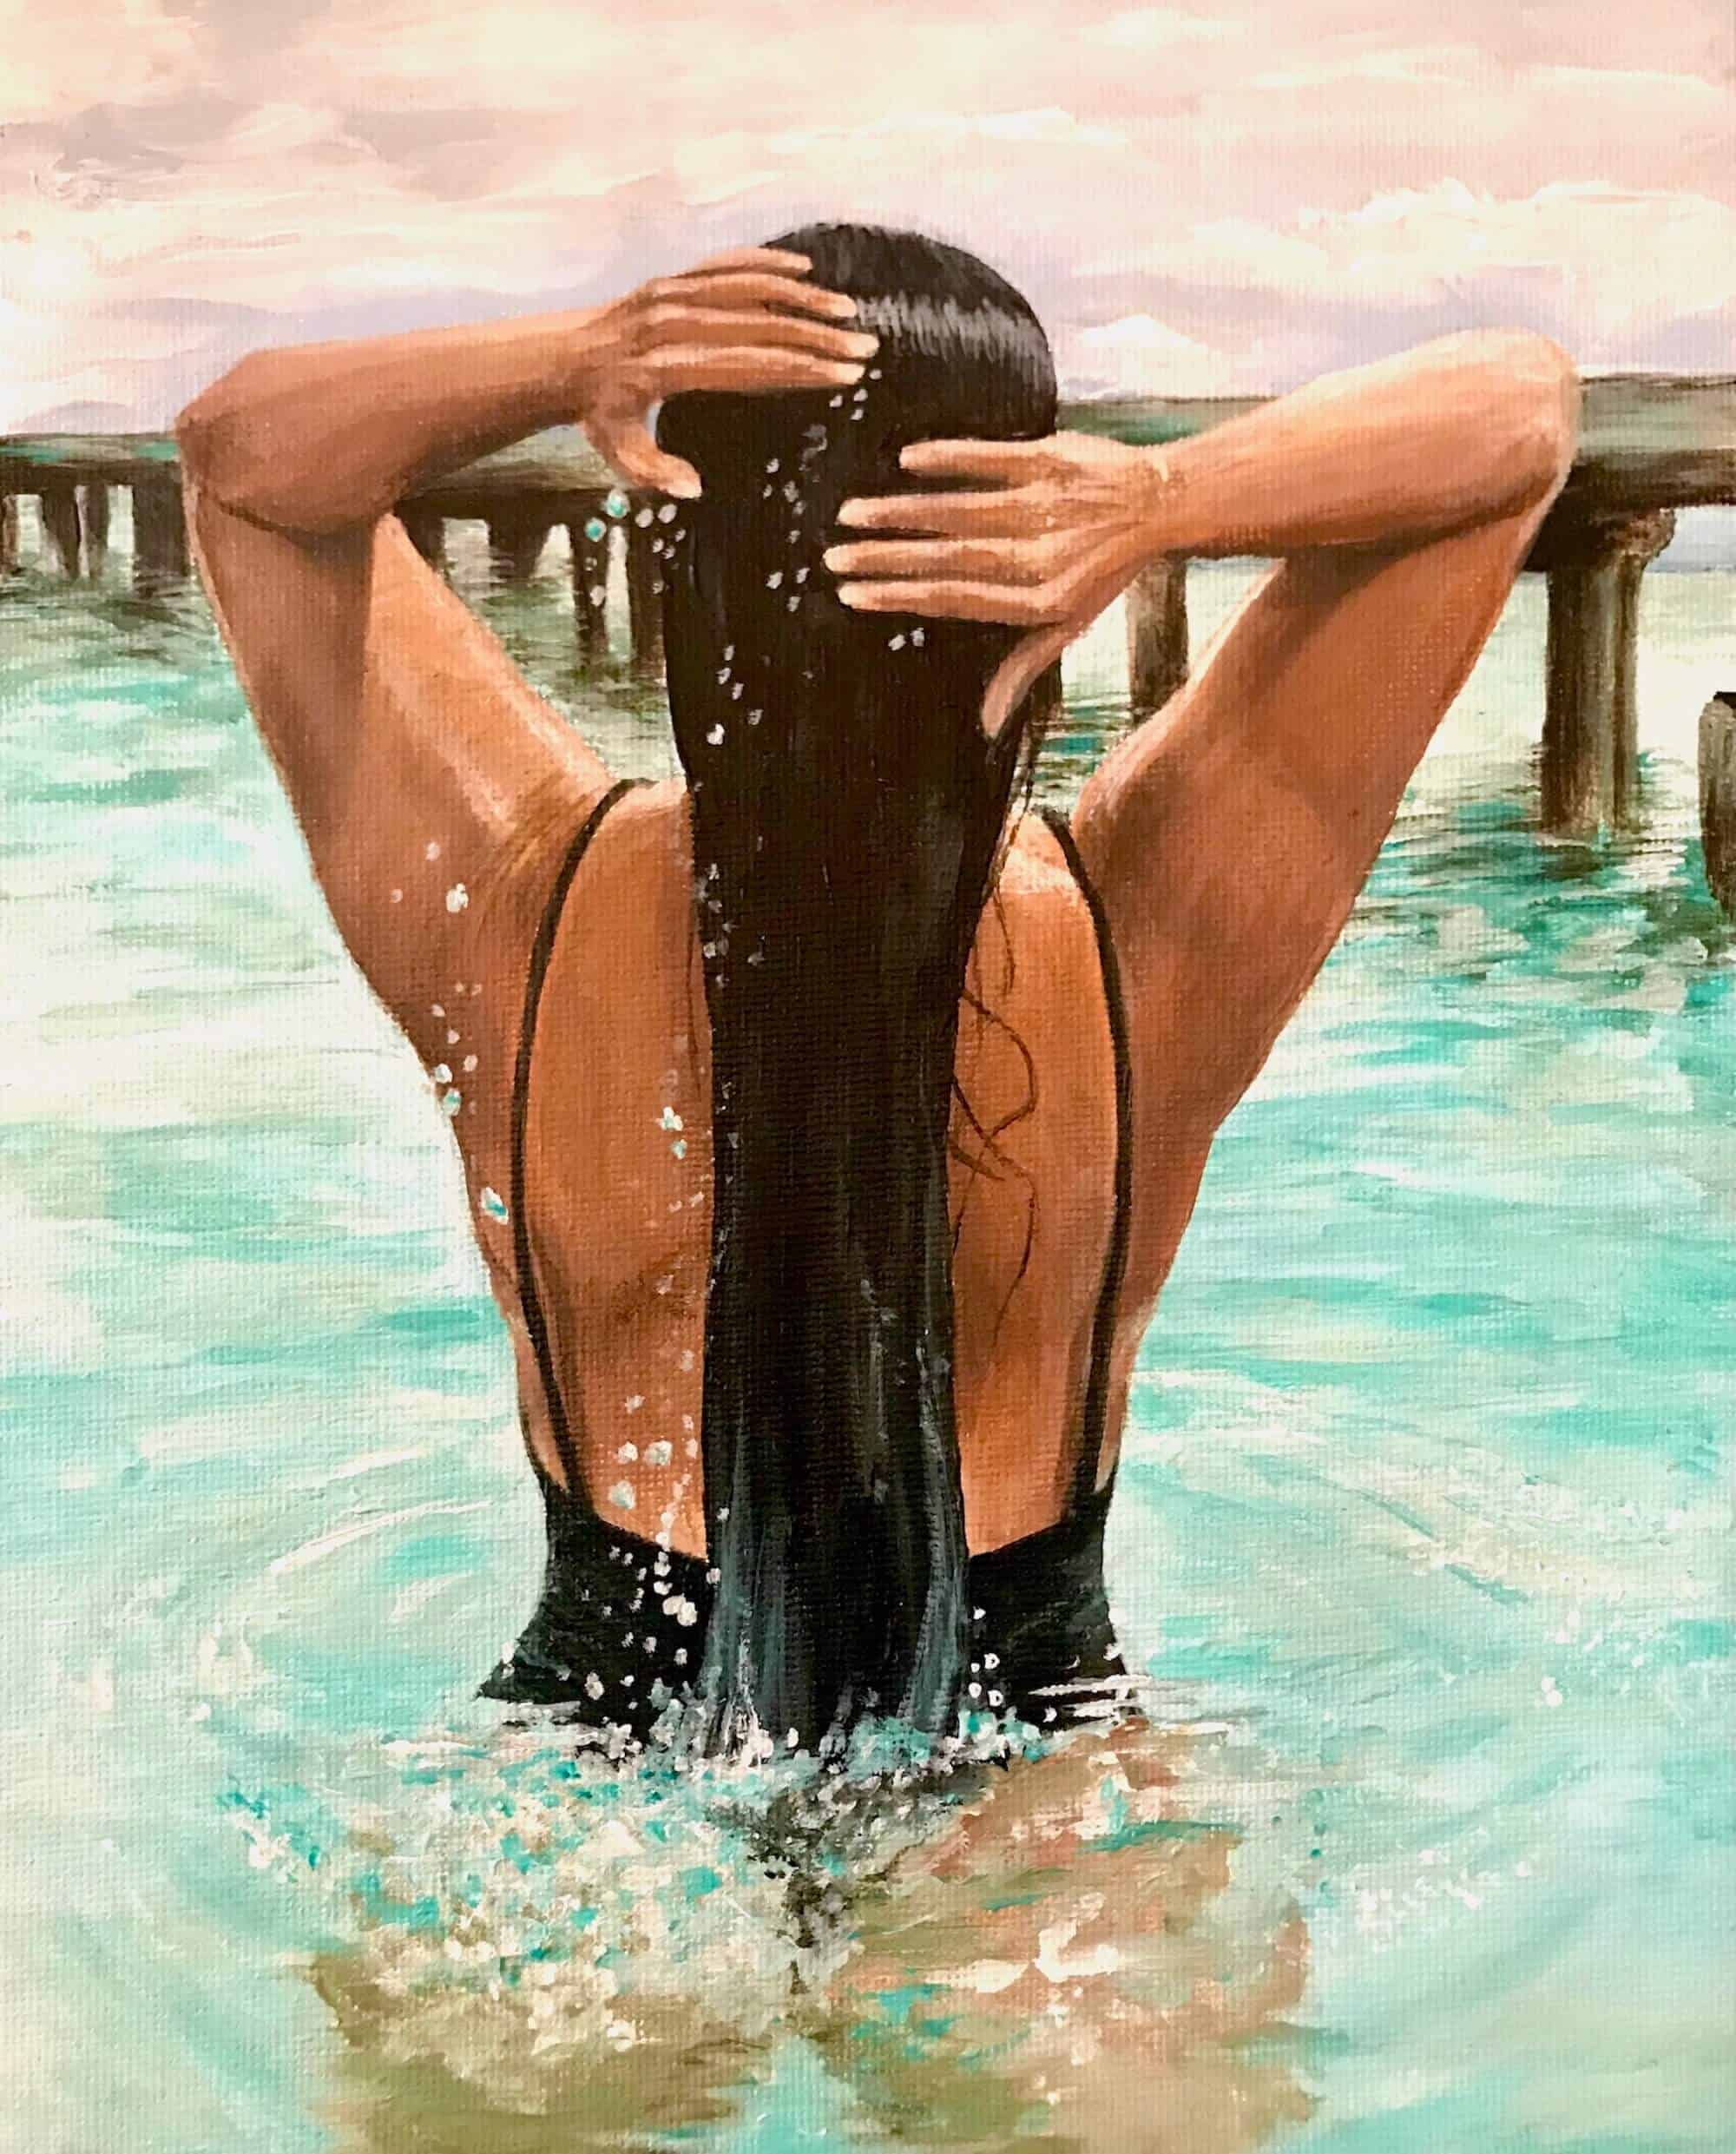 Painting of a Female Figure in Water Wall Art 